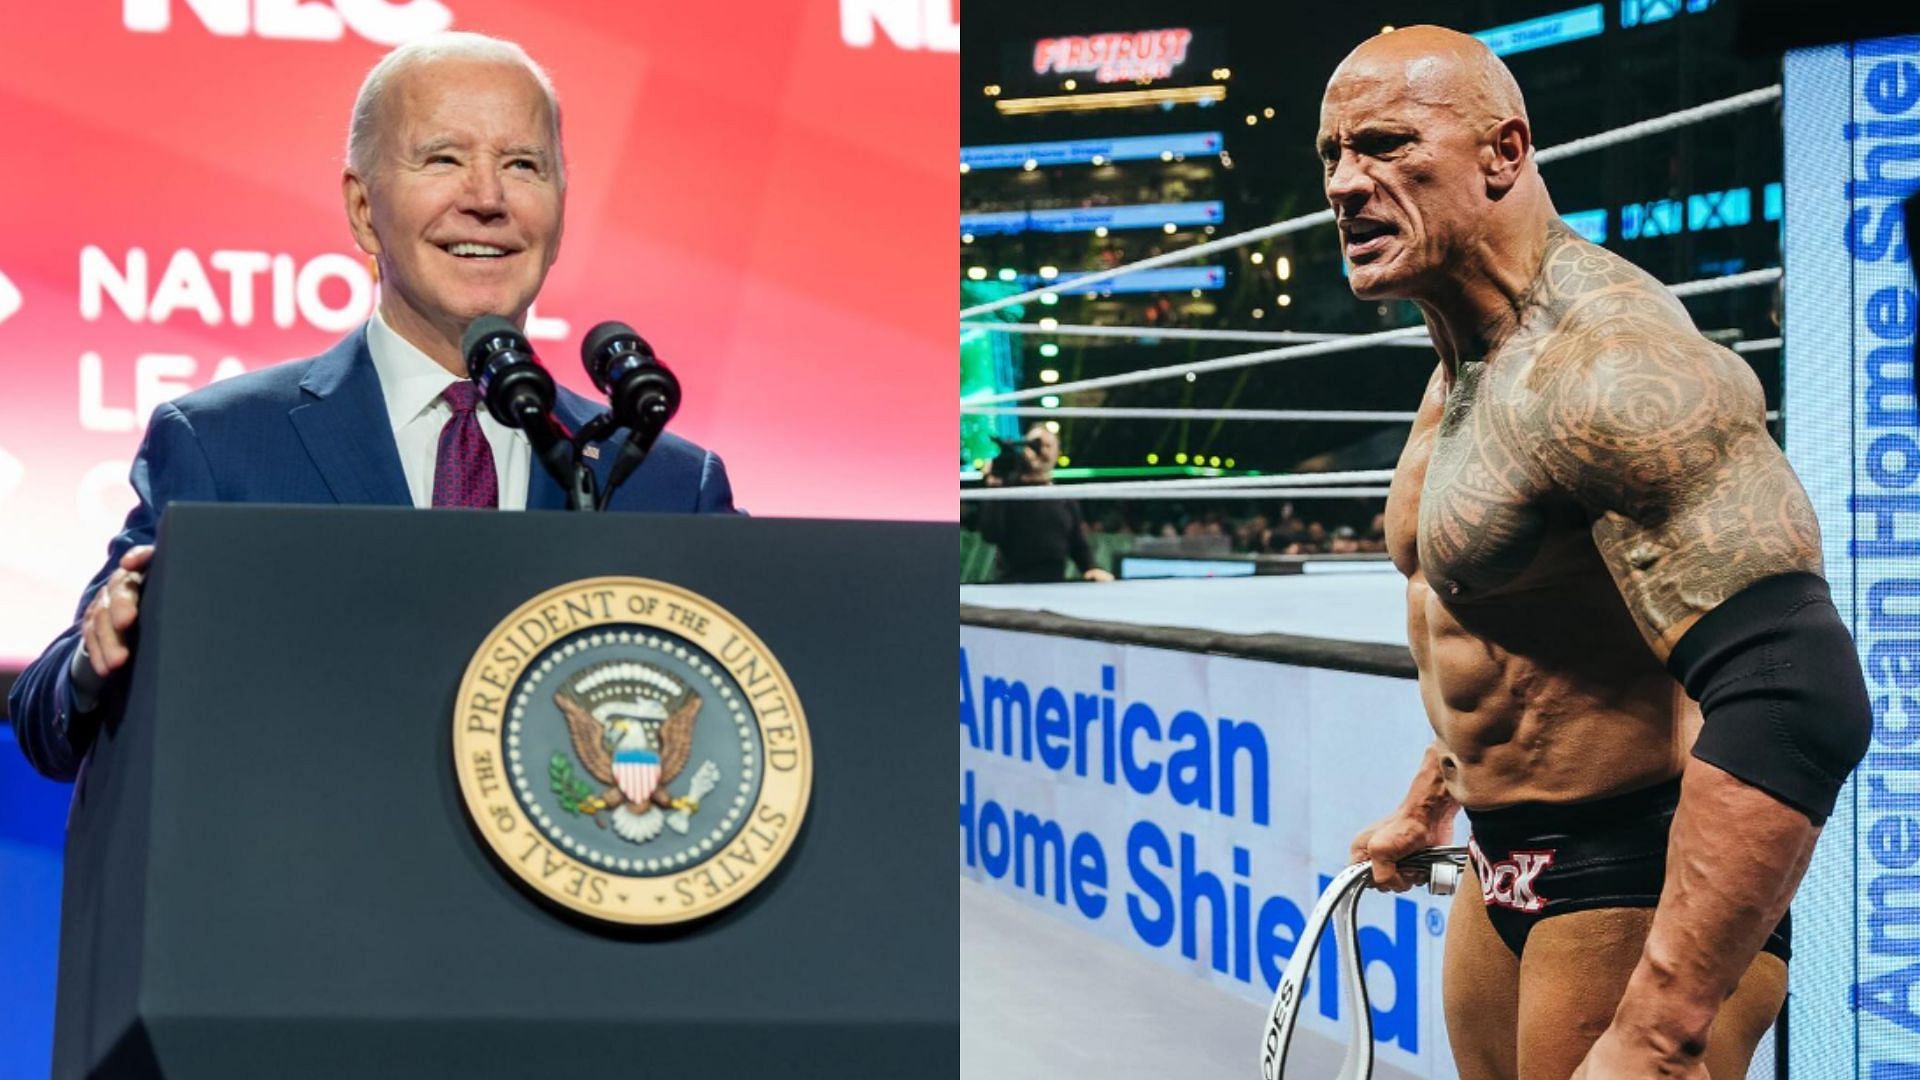 The President of the United States, Joe Biden and Dwayne 